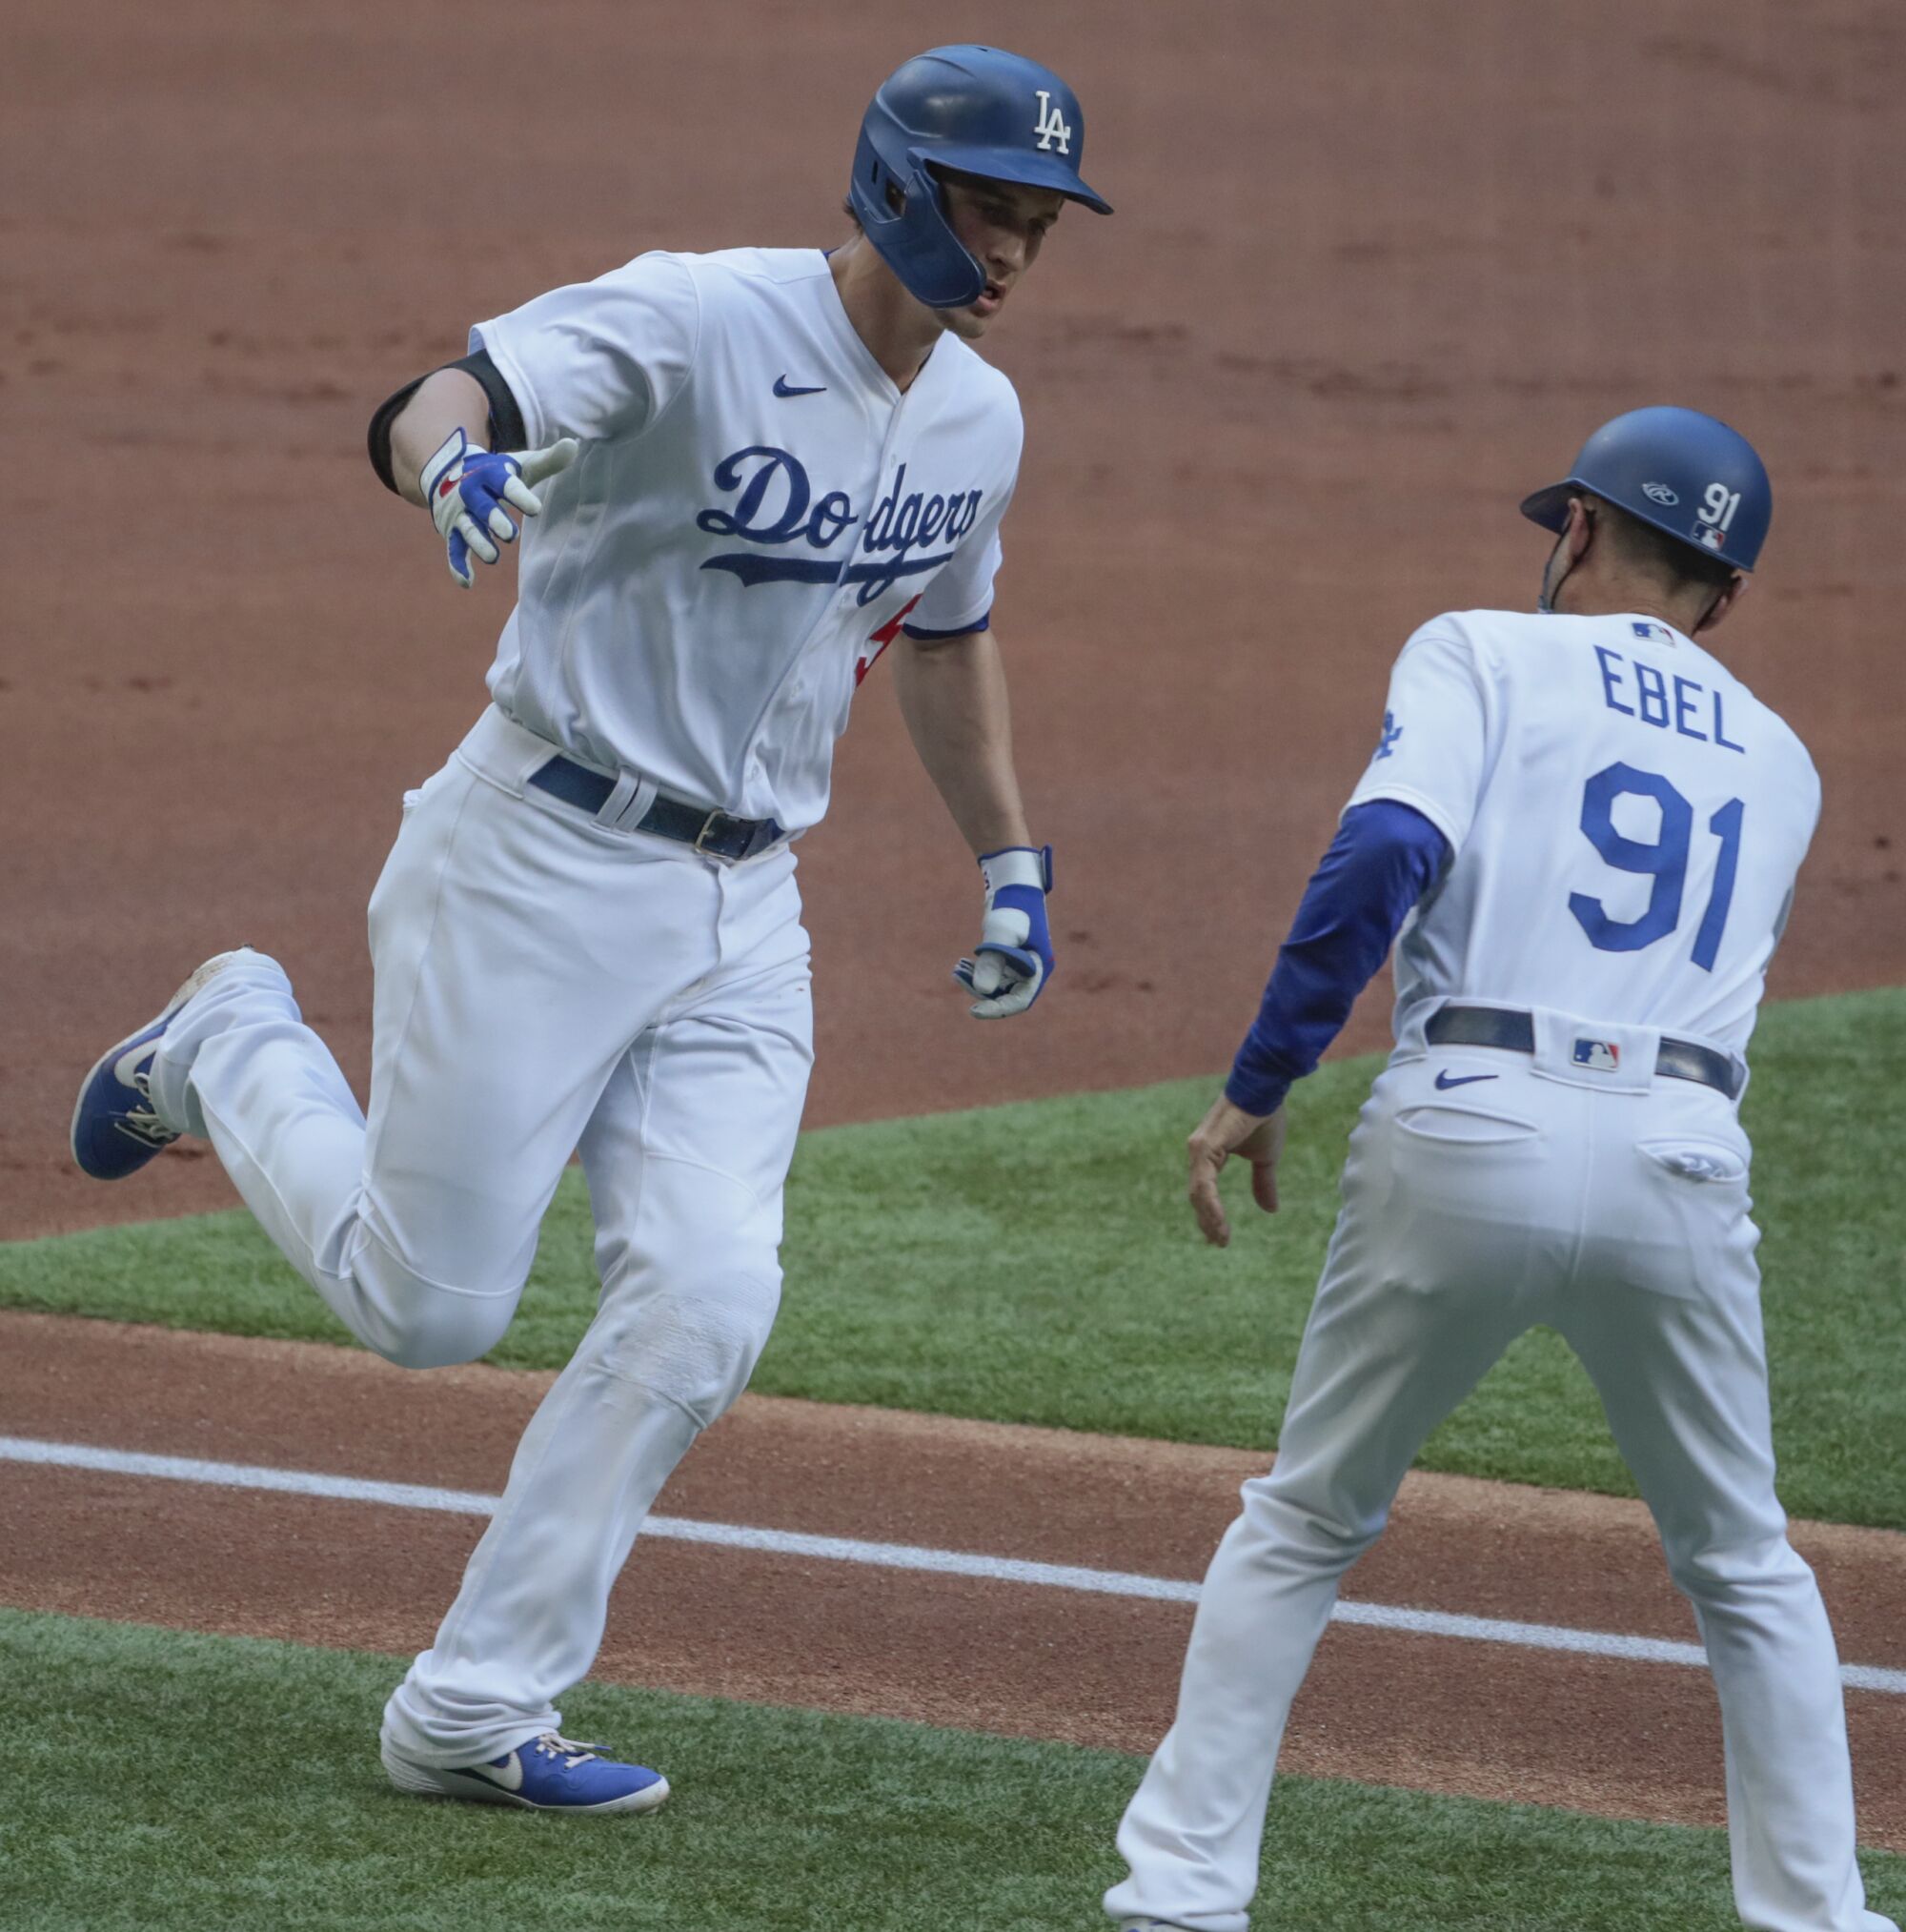 Dodgers shortstop Corey Seager is congratulated by third base coach Dino Ebel after hitting a solo home run.